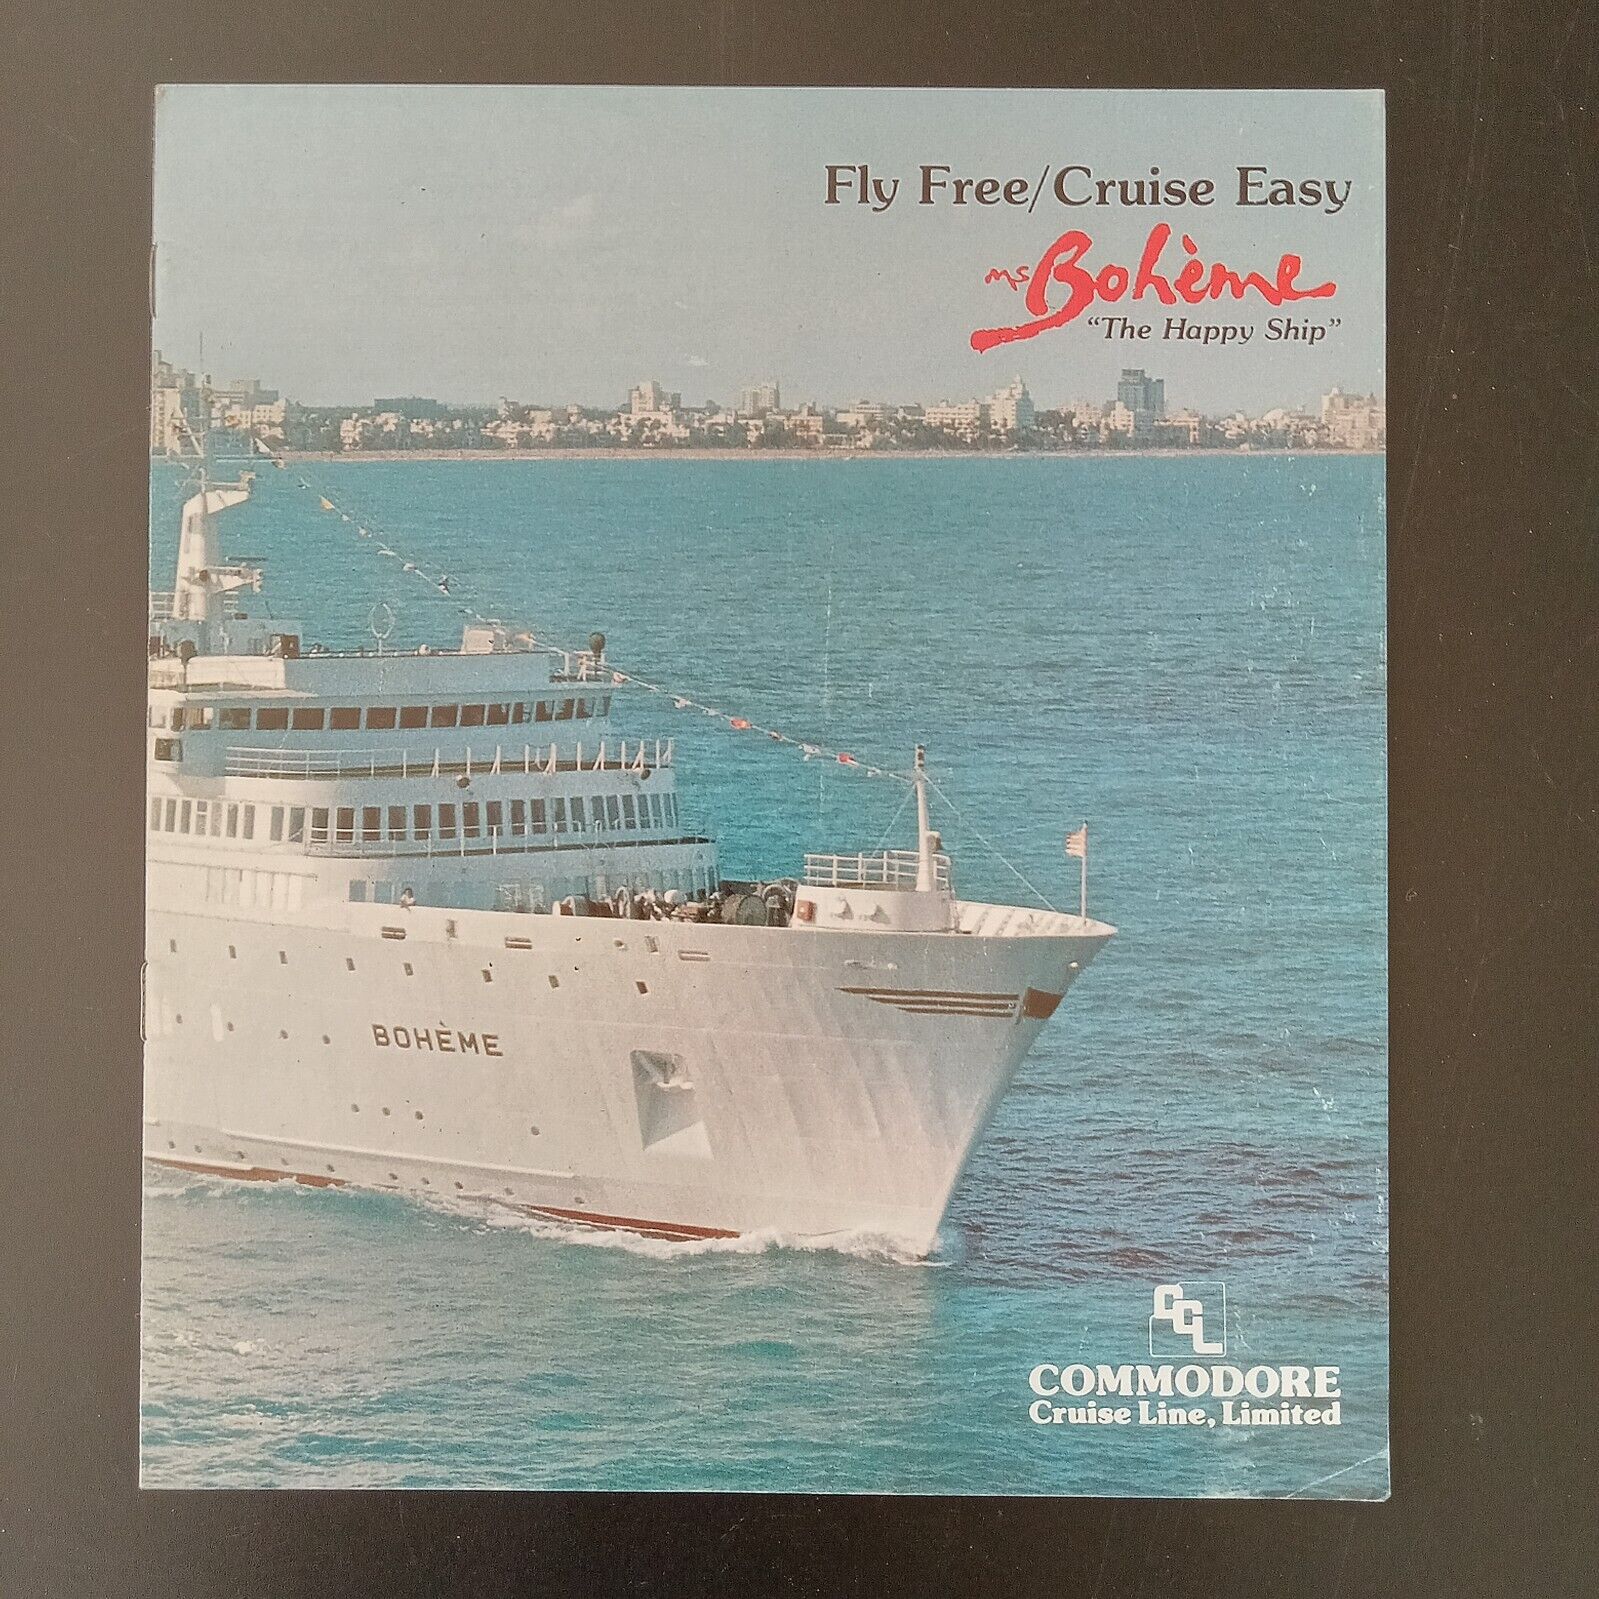 MS BOHEME Commodore Cruise Line THE HAPPY SHIP Brochure Booklet Deck Plans